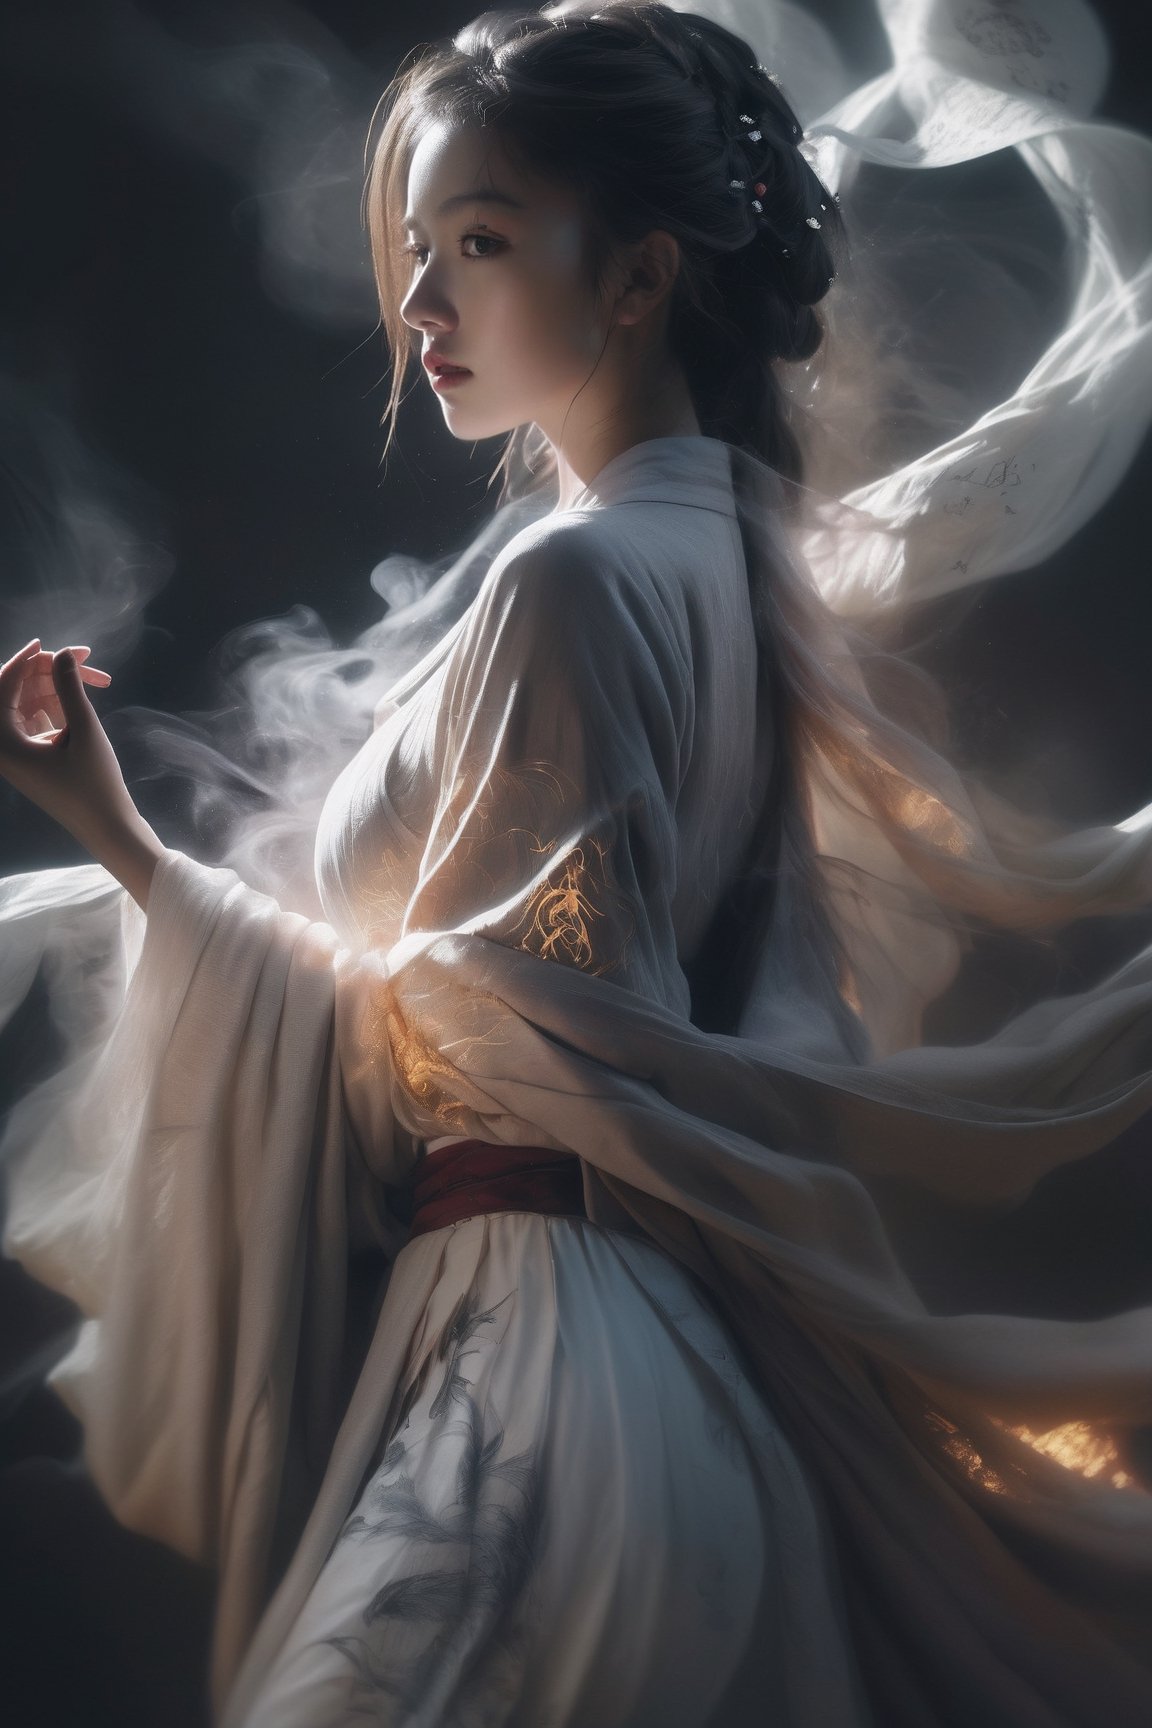 Double Exposure Style, Volumetric Lighting, a girl with Wrap top,arching her back,Traditional Attire,Artistic Calligraphy and Ink,, light depth, dramatic atmospheric lighting, Volumetric Lighting, double image ghost effect, image combination, double exposure style, looking_at_viewer, full body, long legs,